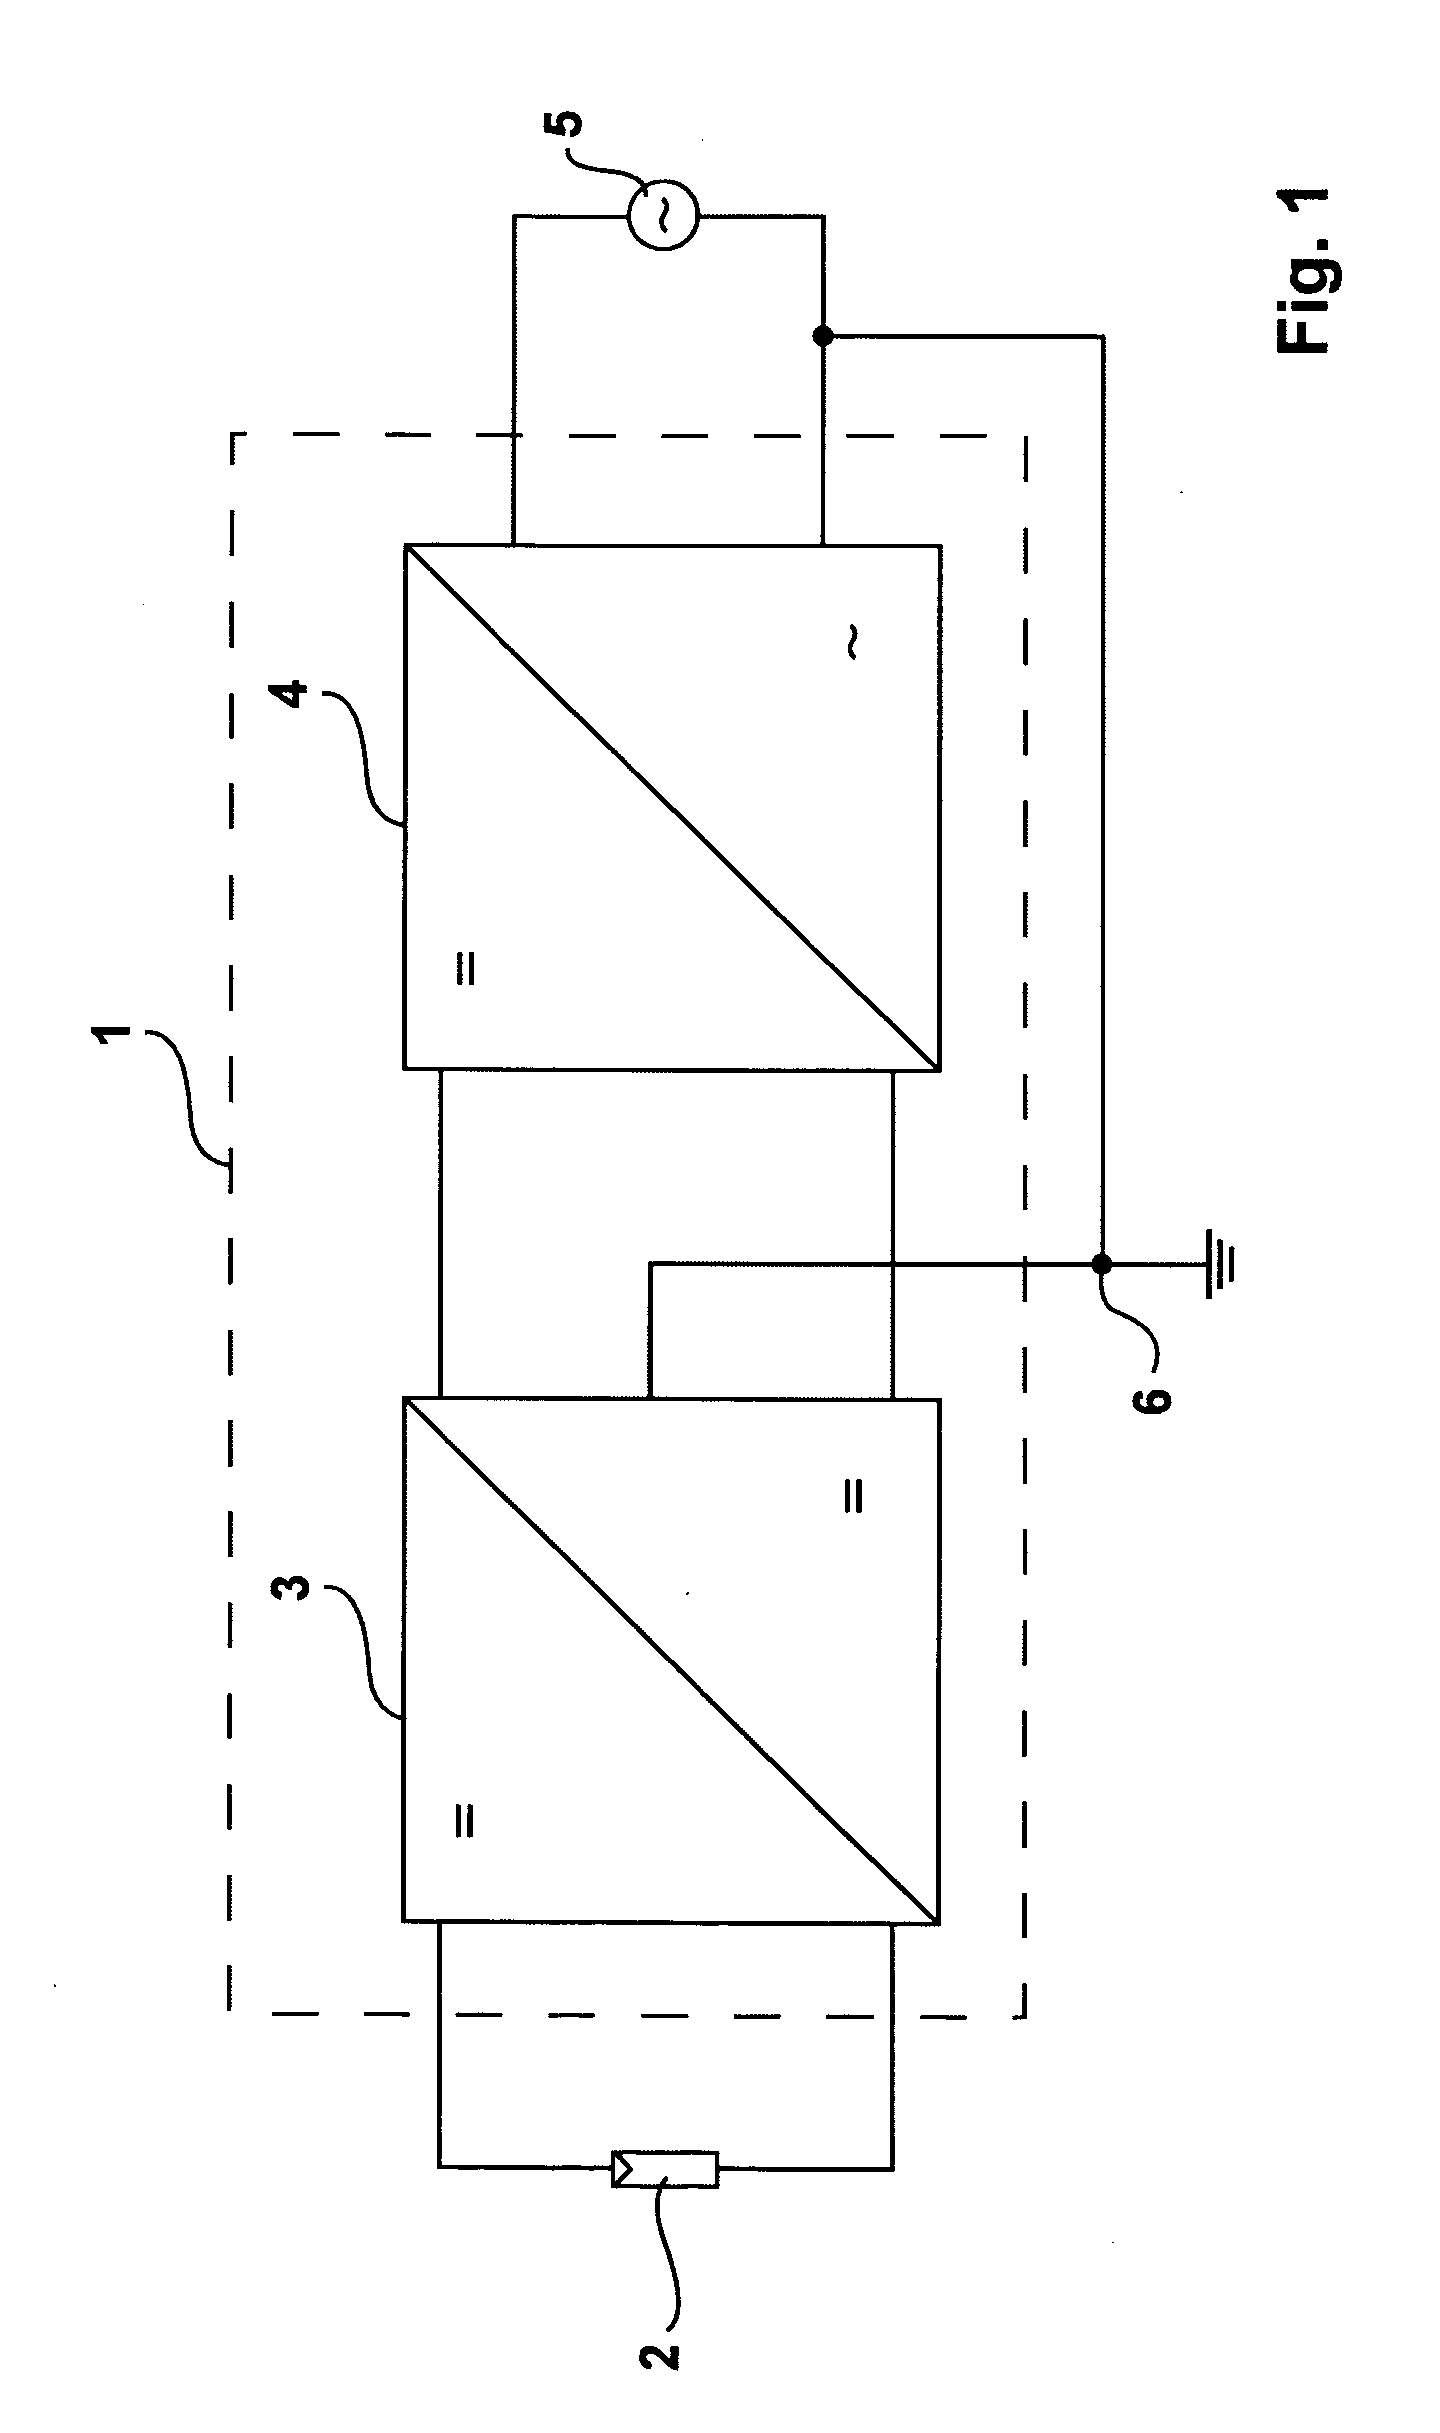 Inverter for grounded direct current source, more specifically for a photovoltaic generator